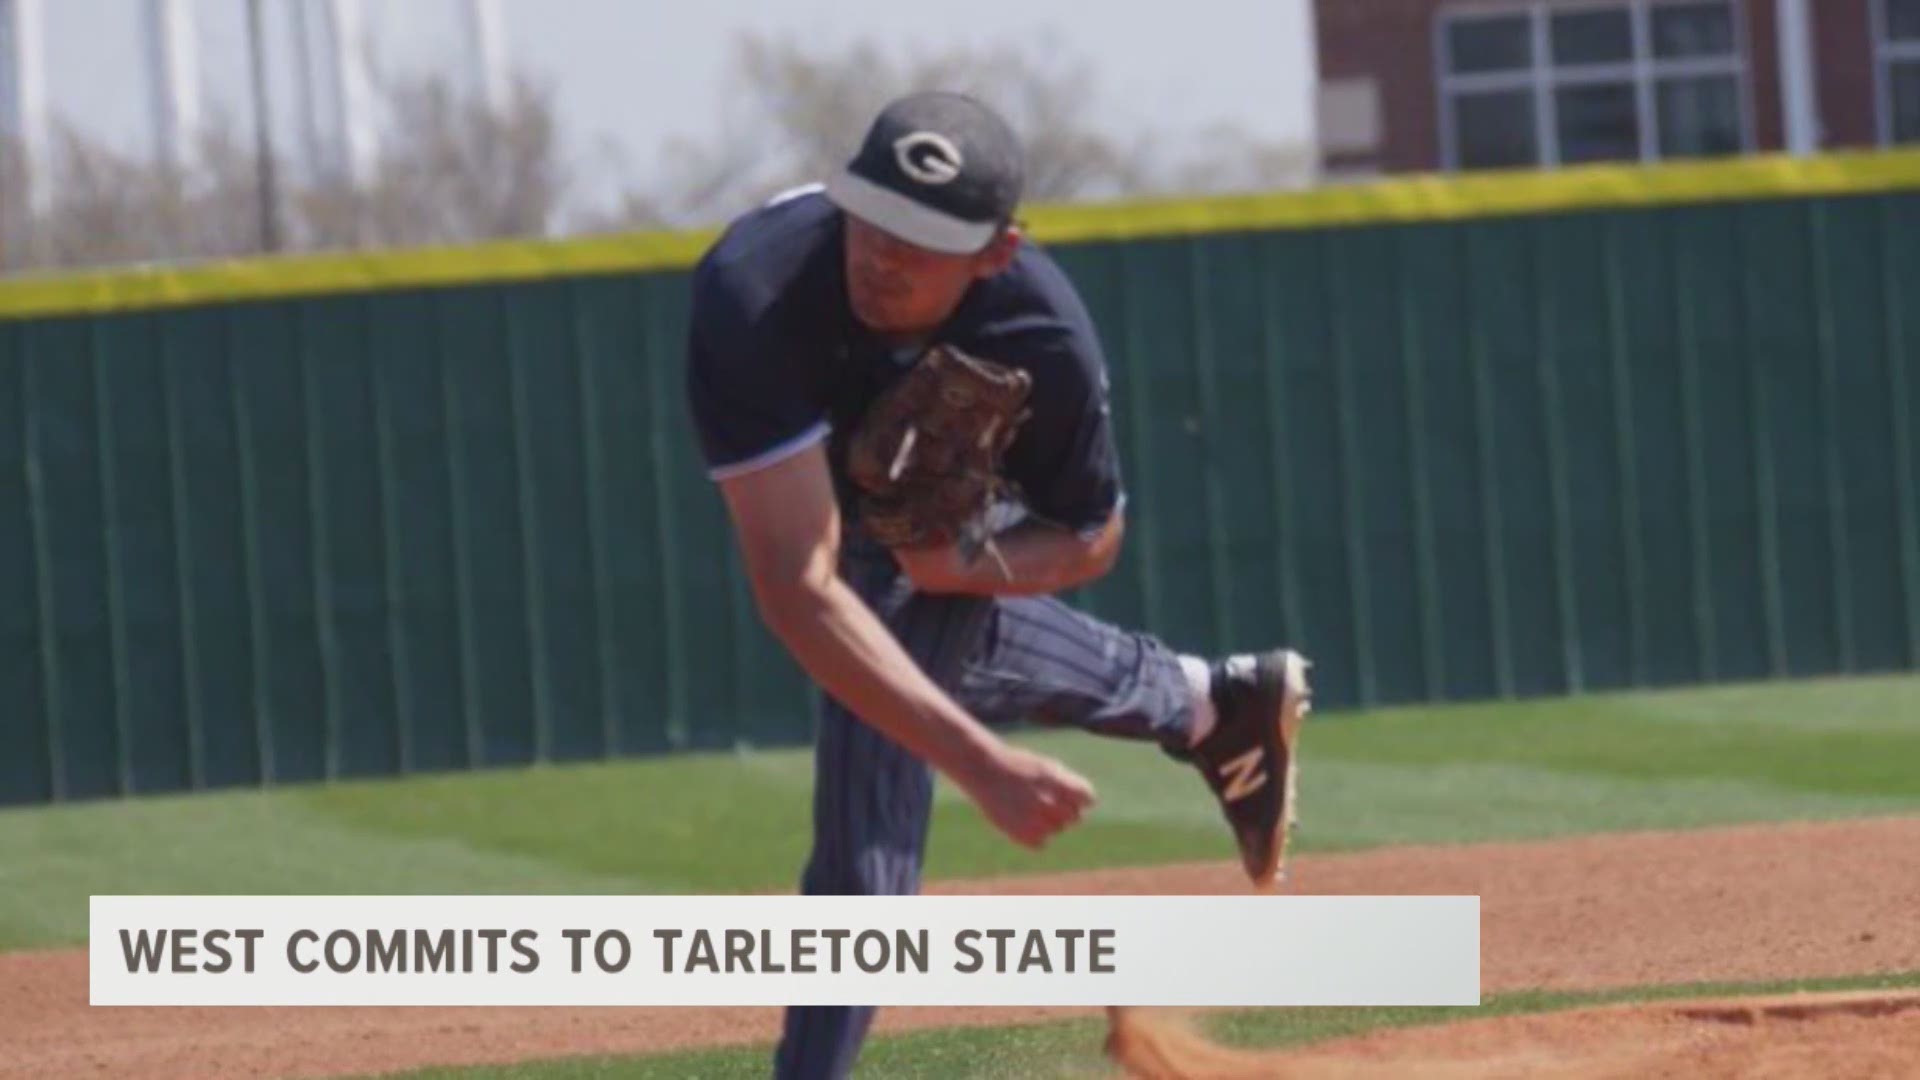 The Stamford grad will play pitcher for Tarleton State